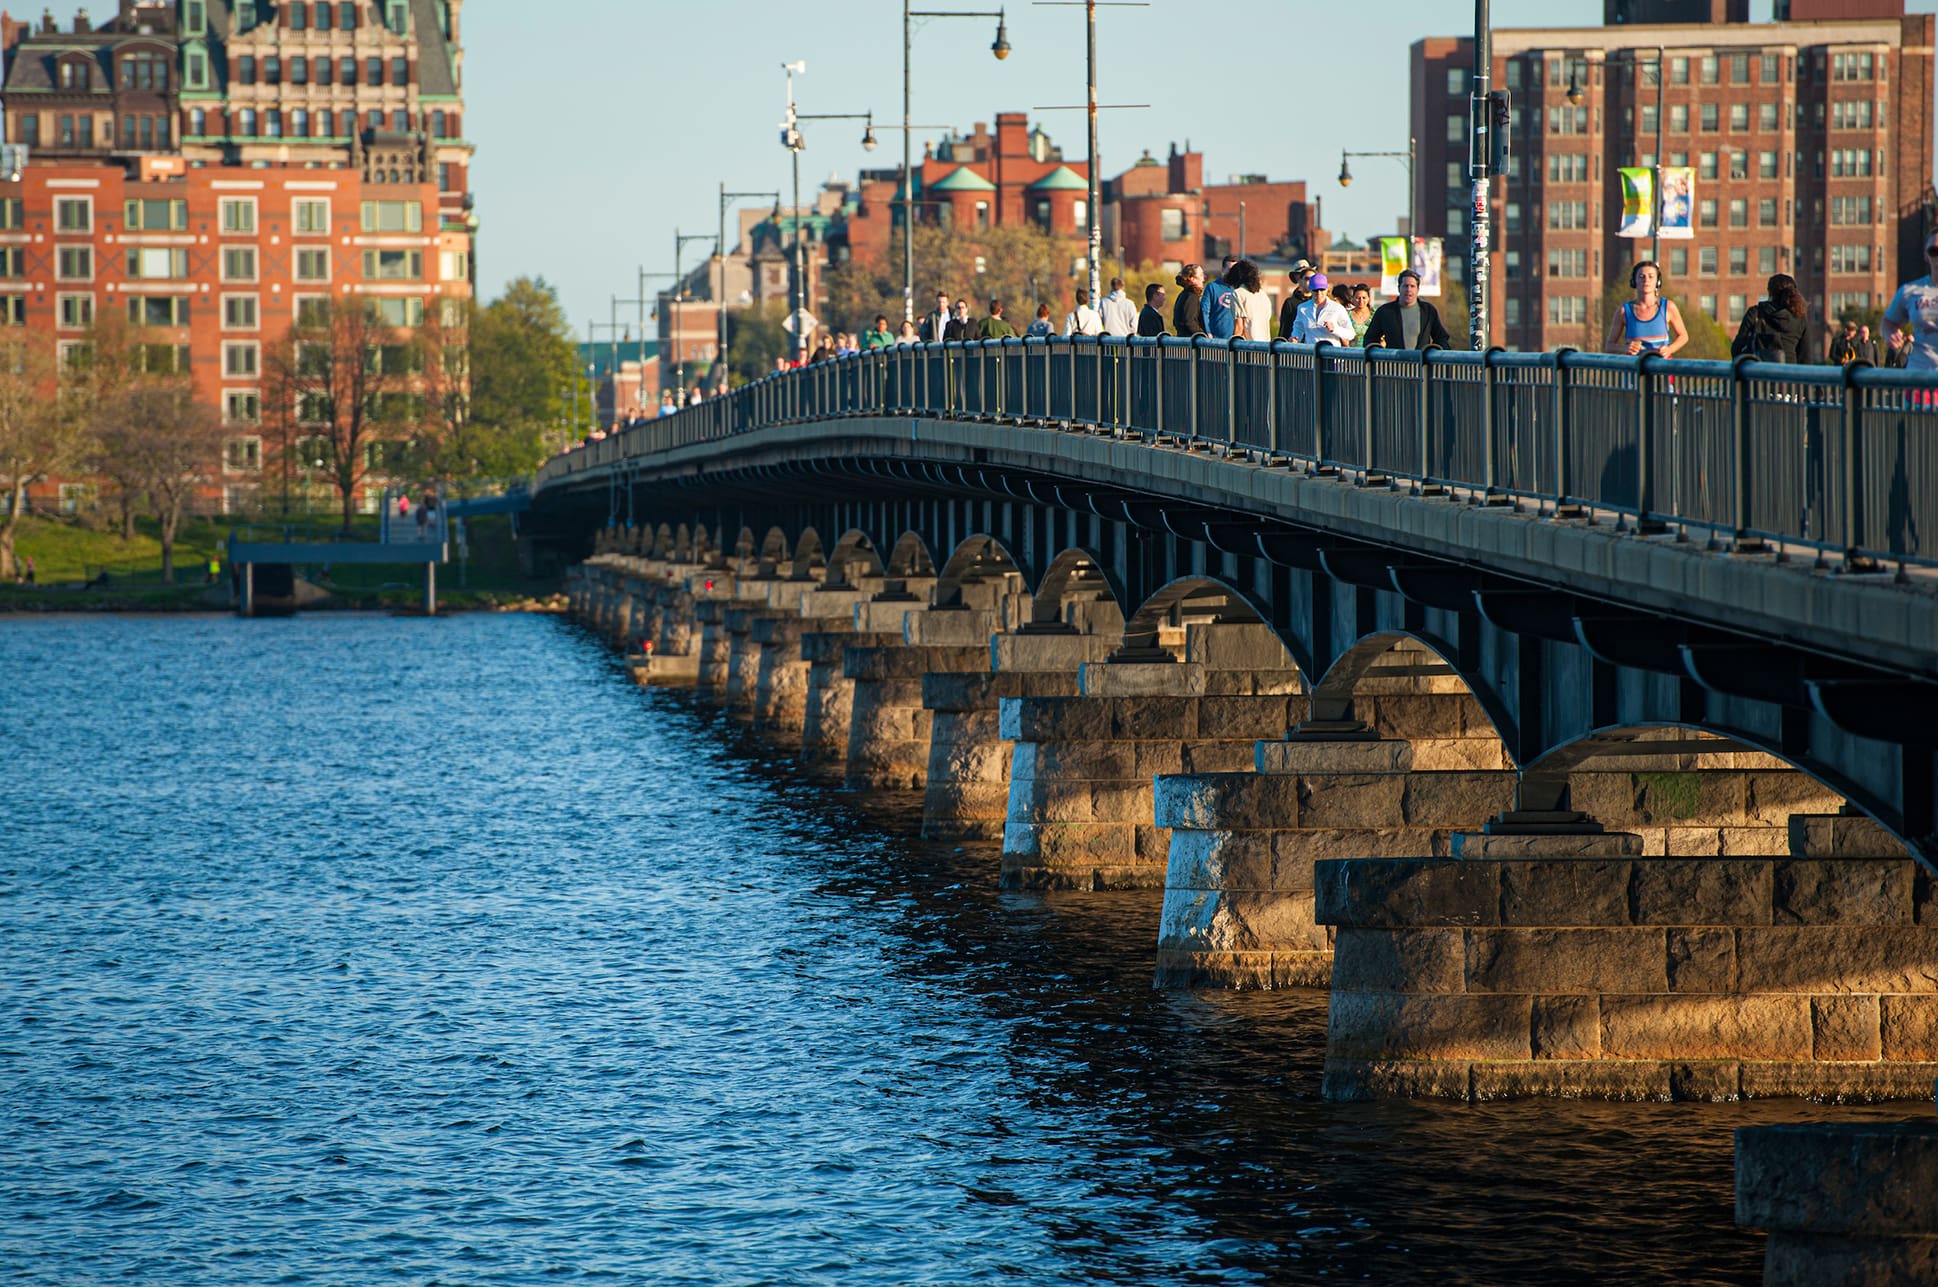 View of the Massachusetts Avenue bridge crossing the Charles River.